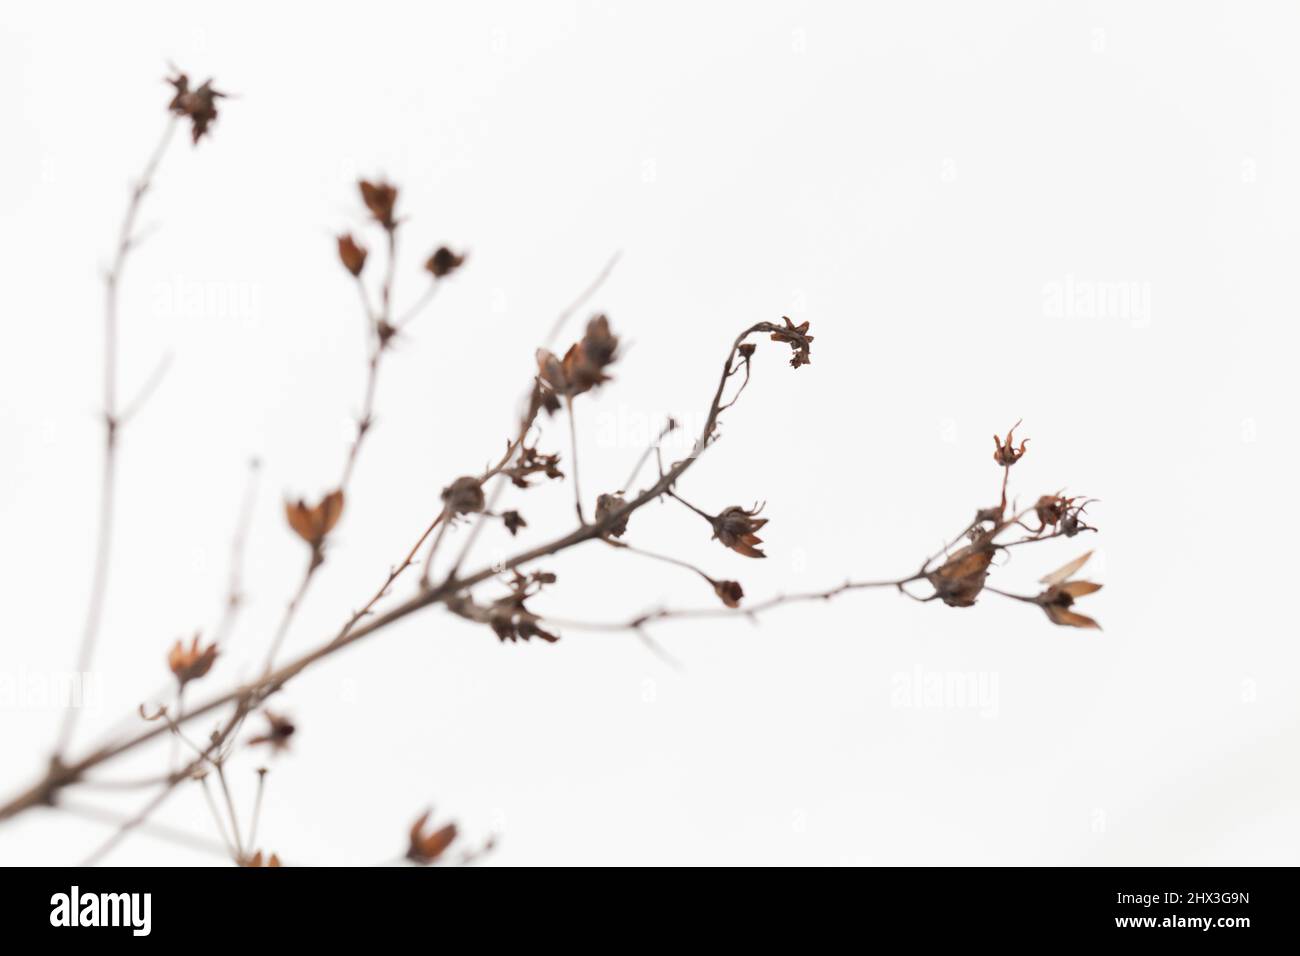 Dry flowers over white snow, natural winter background. Close up photo with soft selective focus Stock Photo